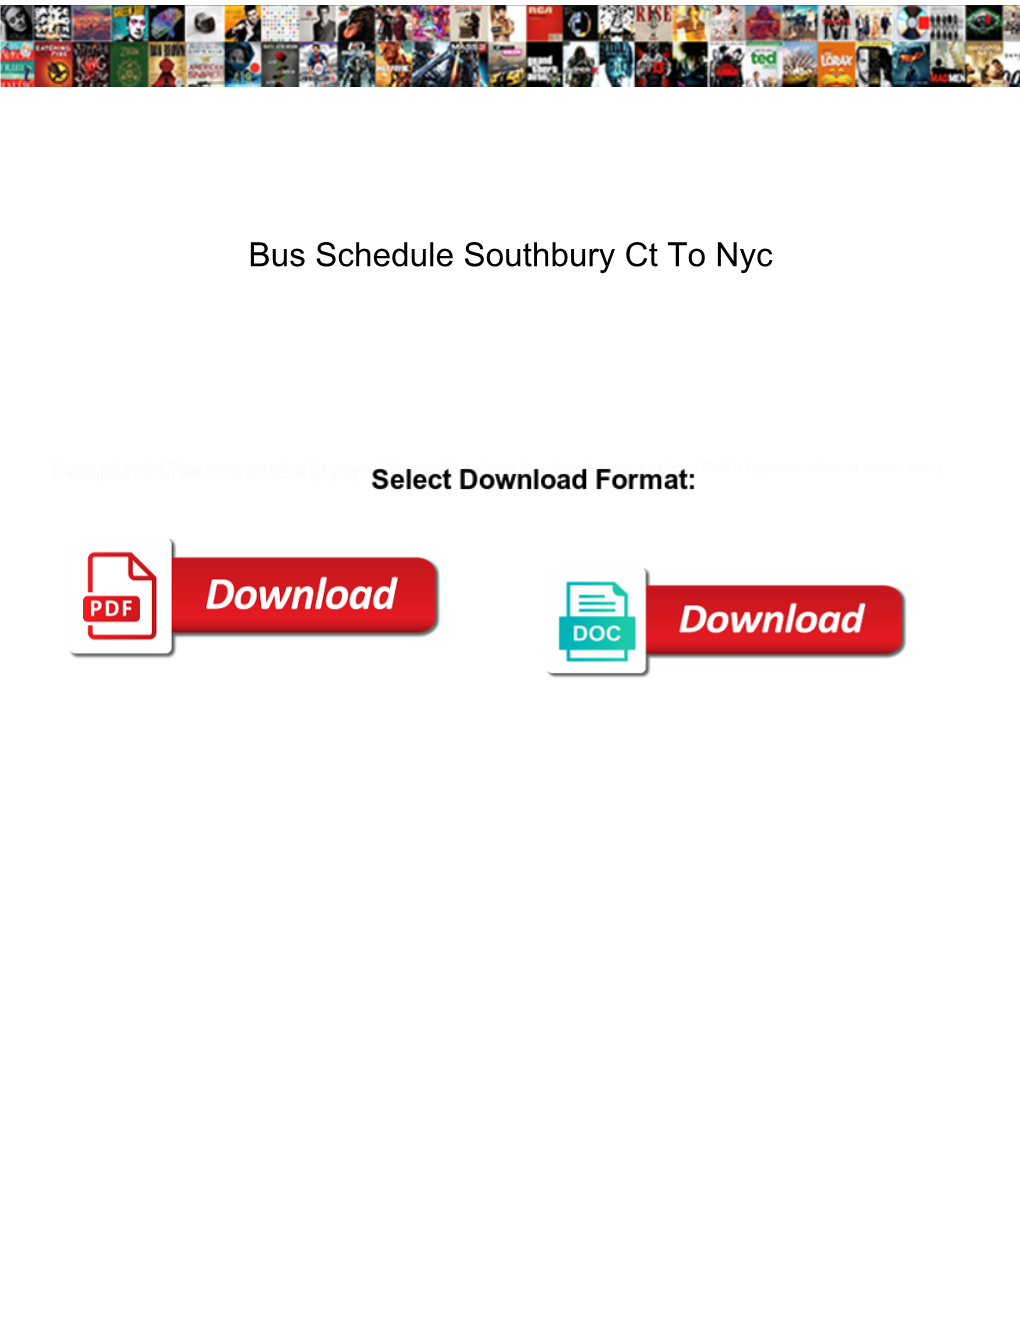 Bus Schedule Southbury Ct to Nyc